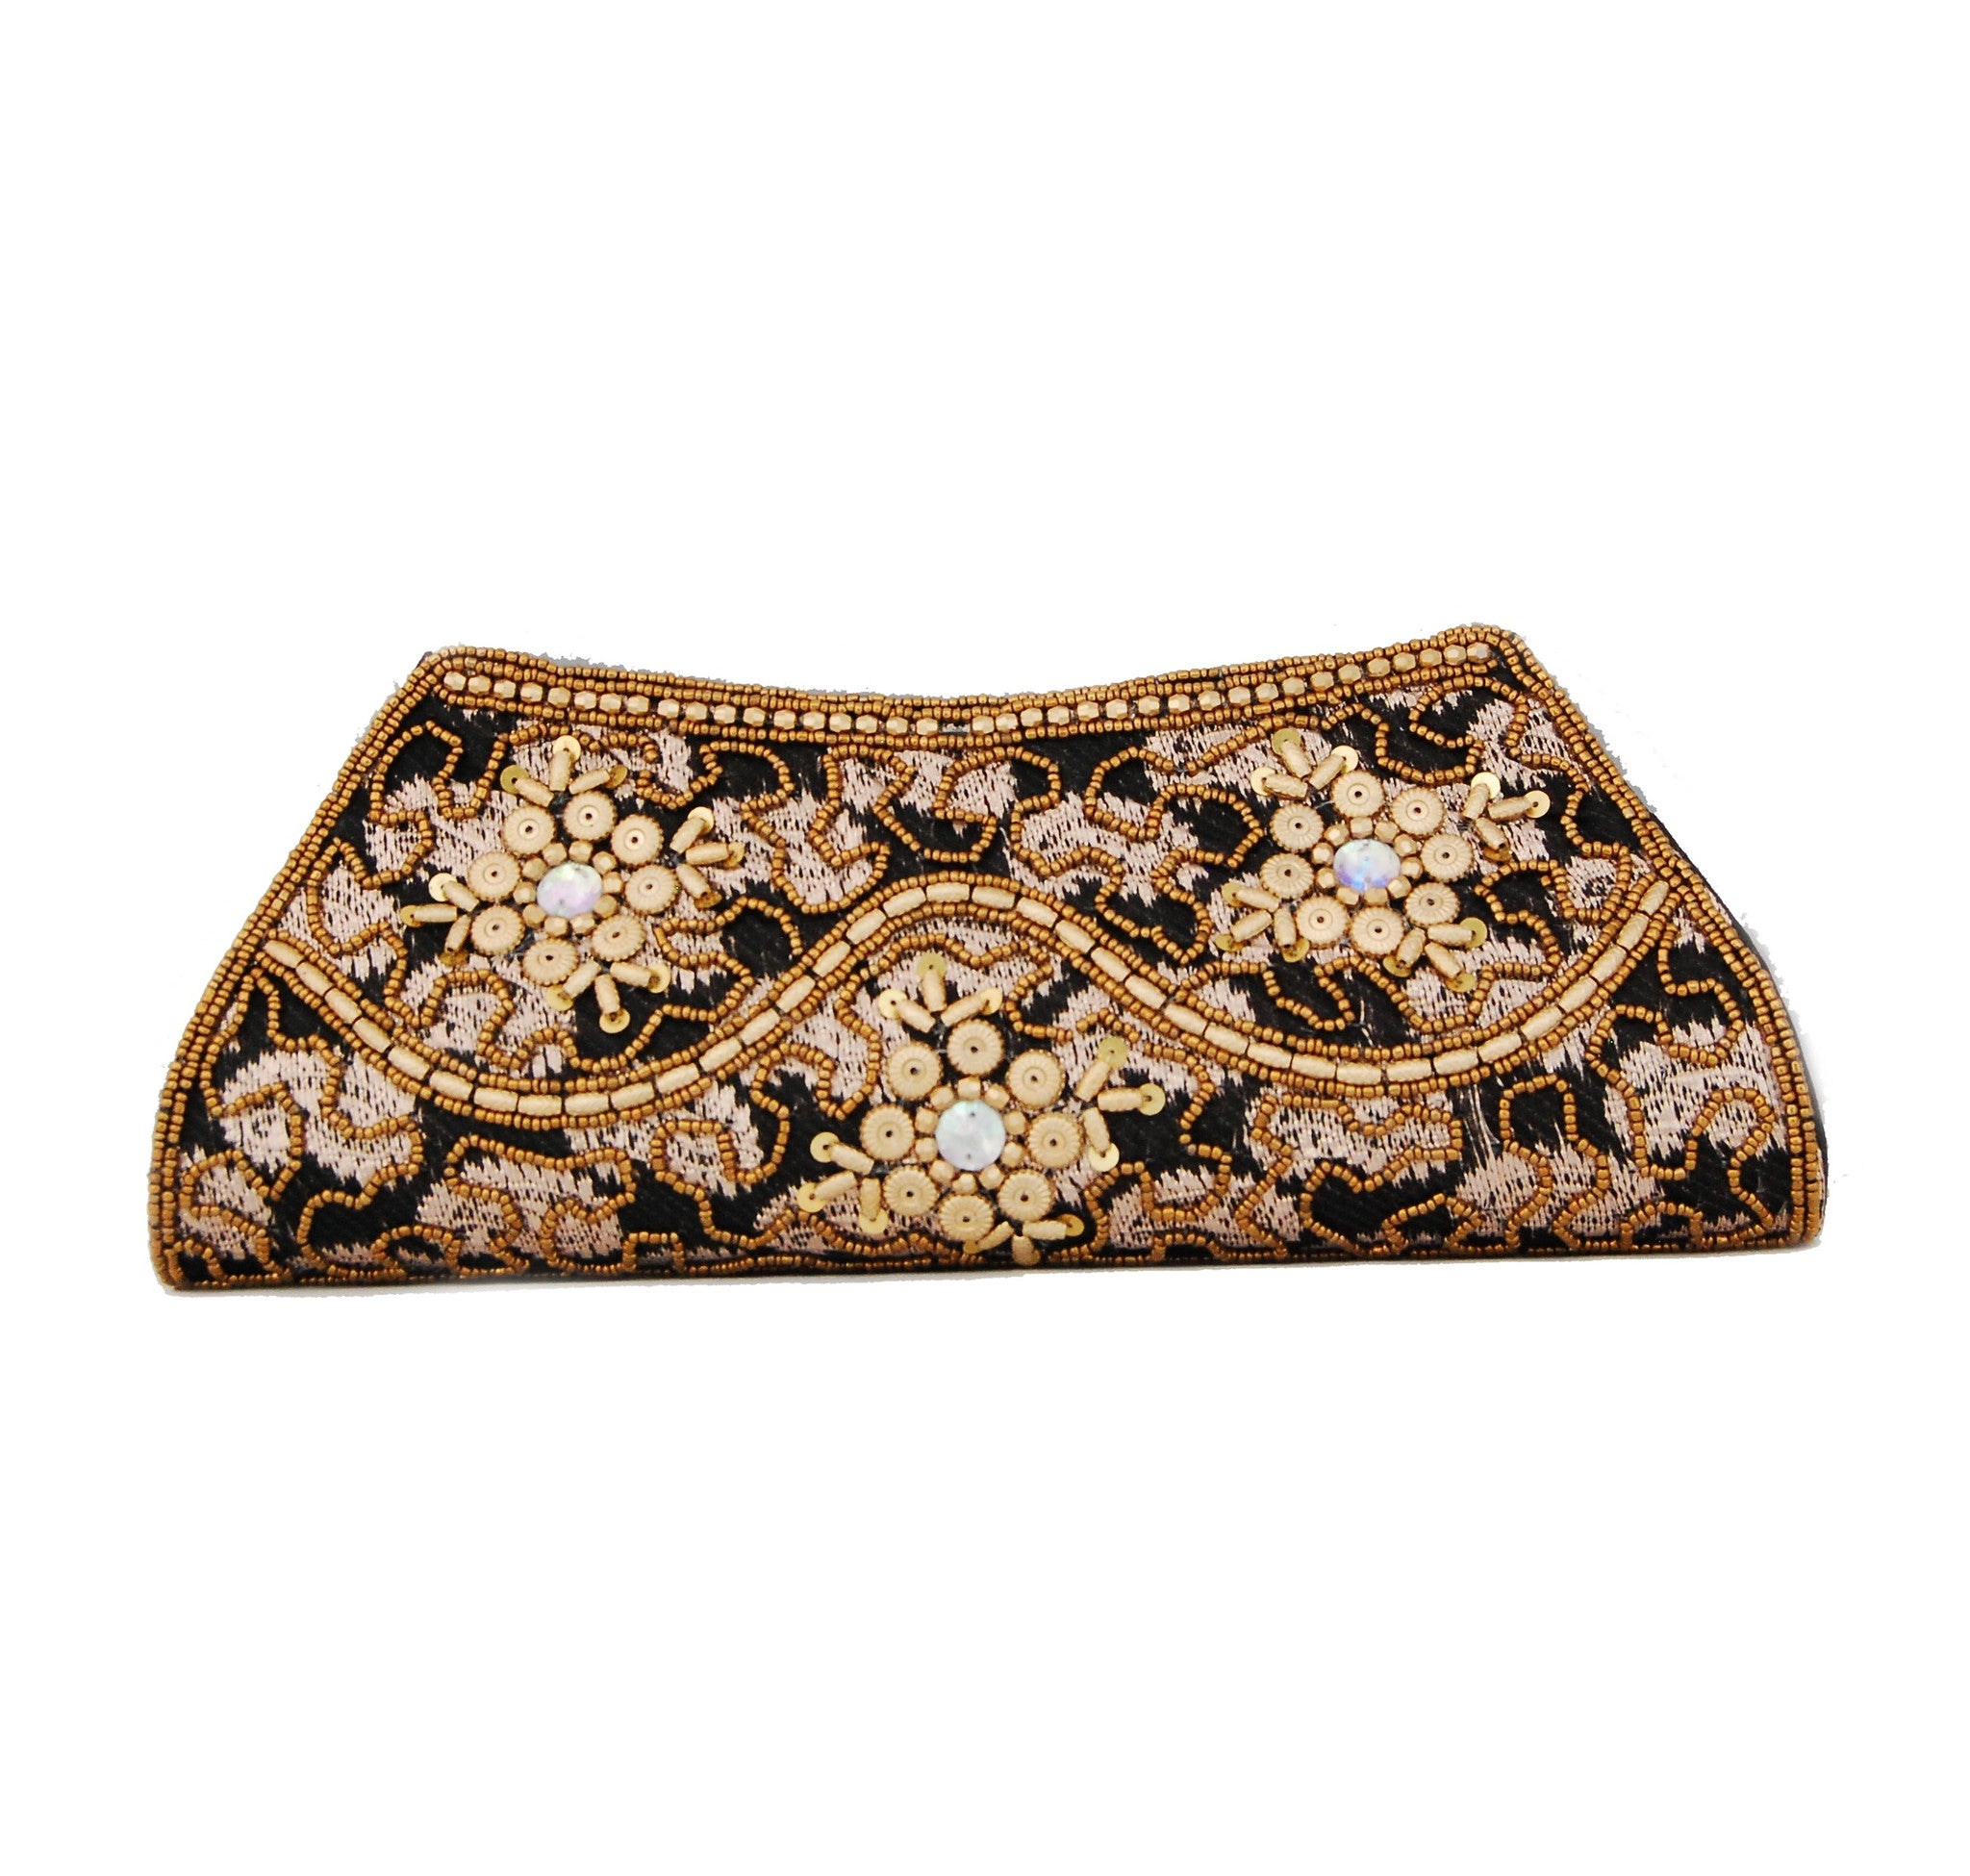 Black color Dupion Silk Clutch Bag with beads and Brocade Fabric - Boutique4India Inc.